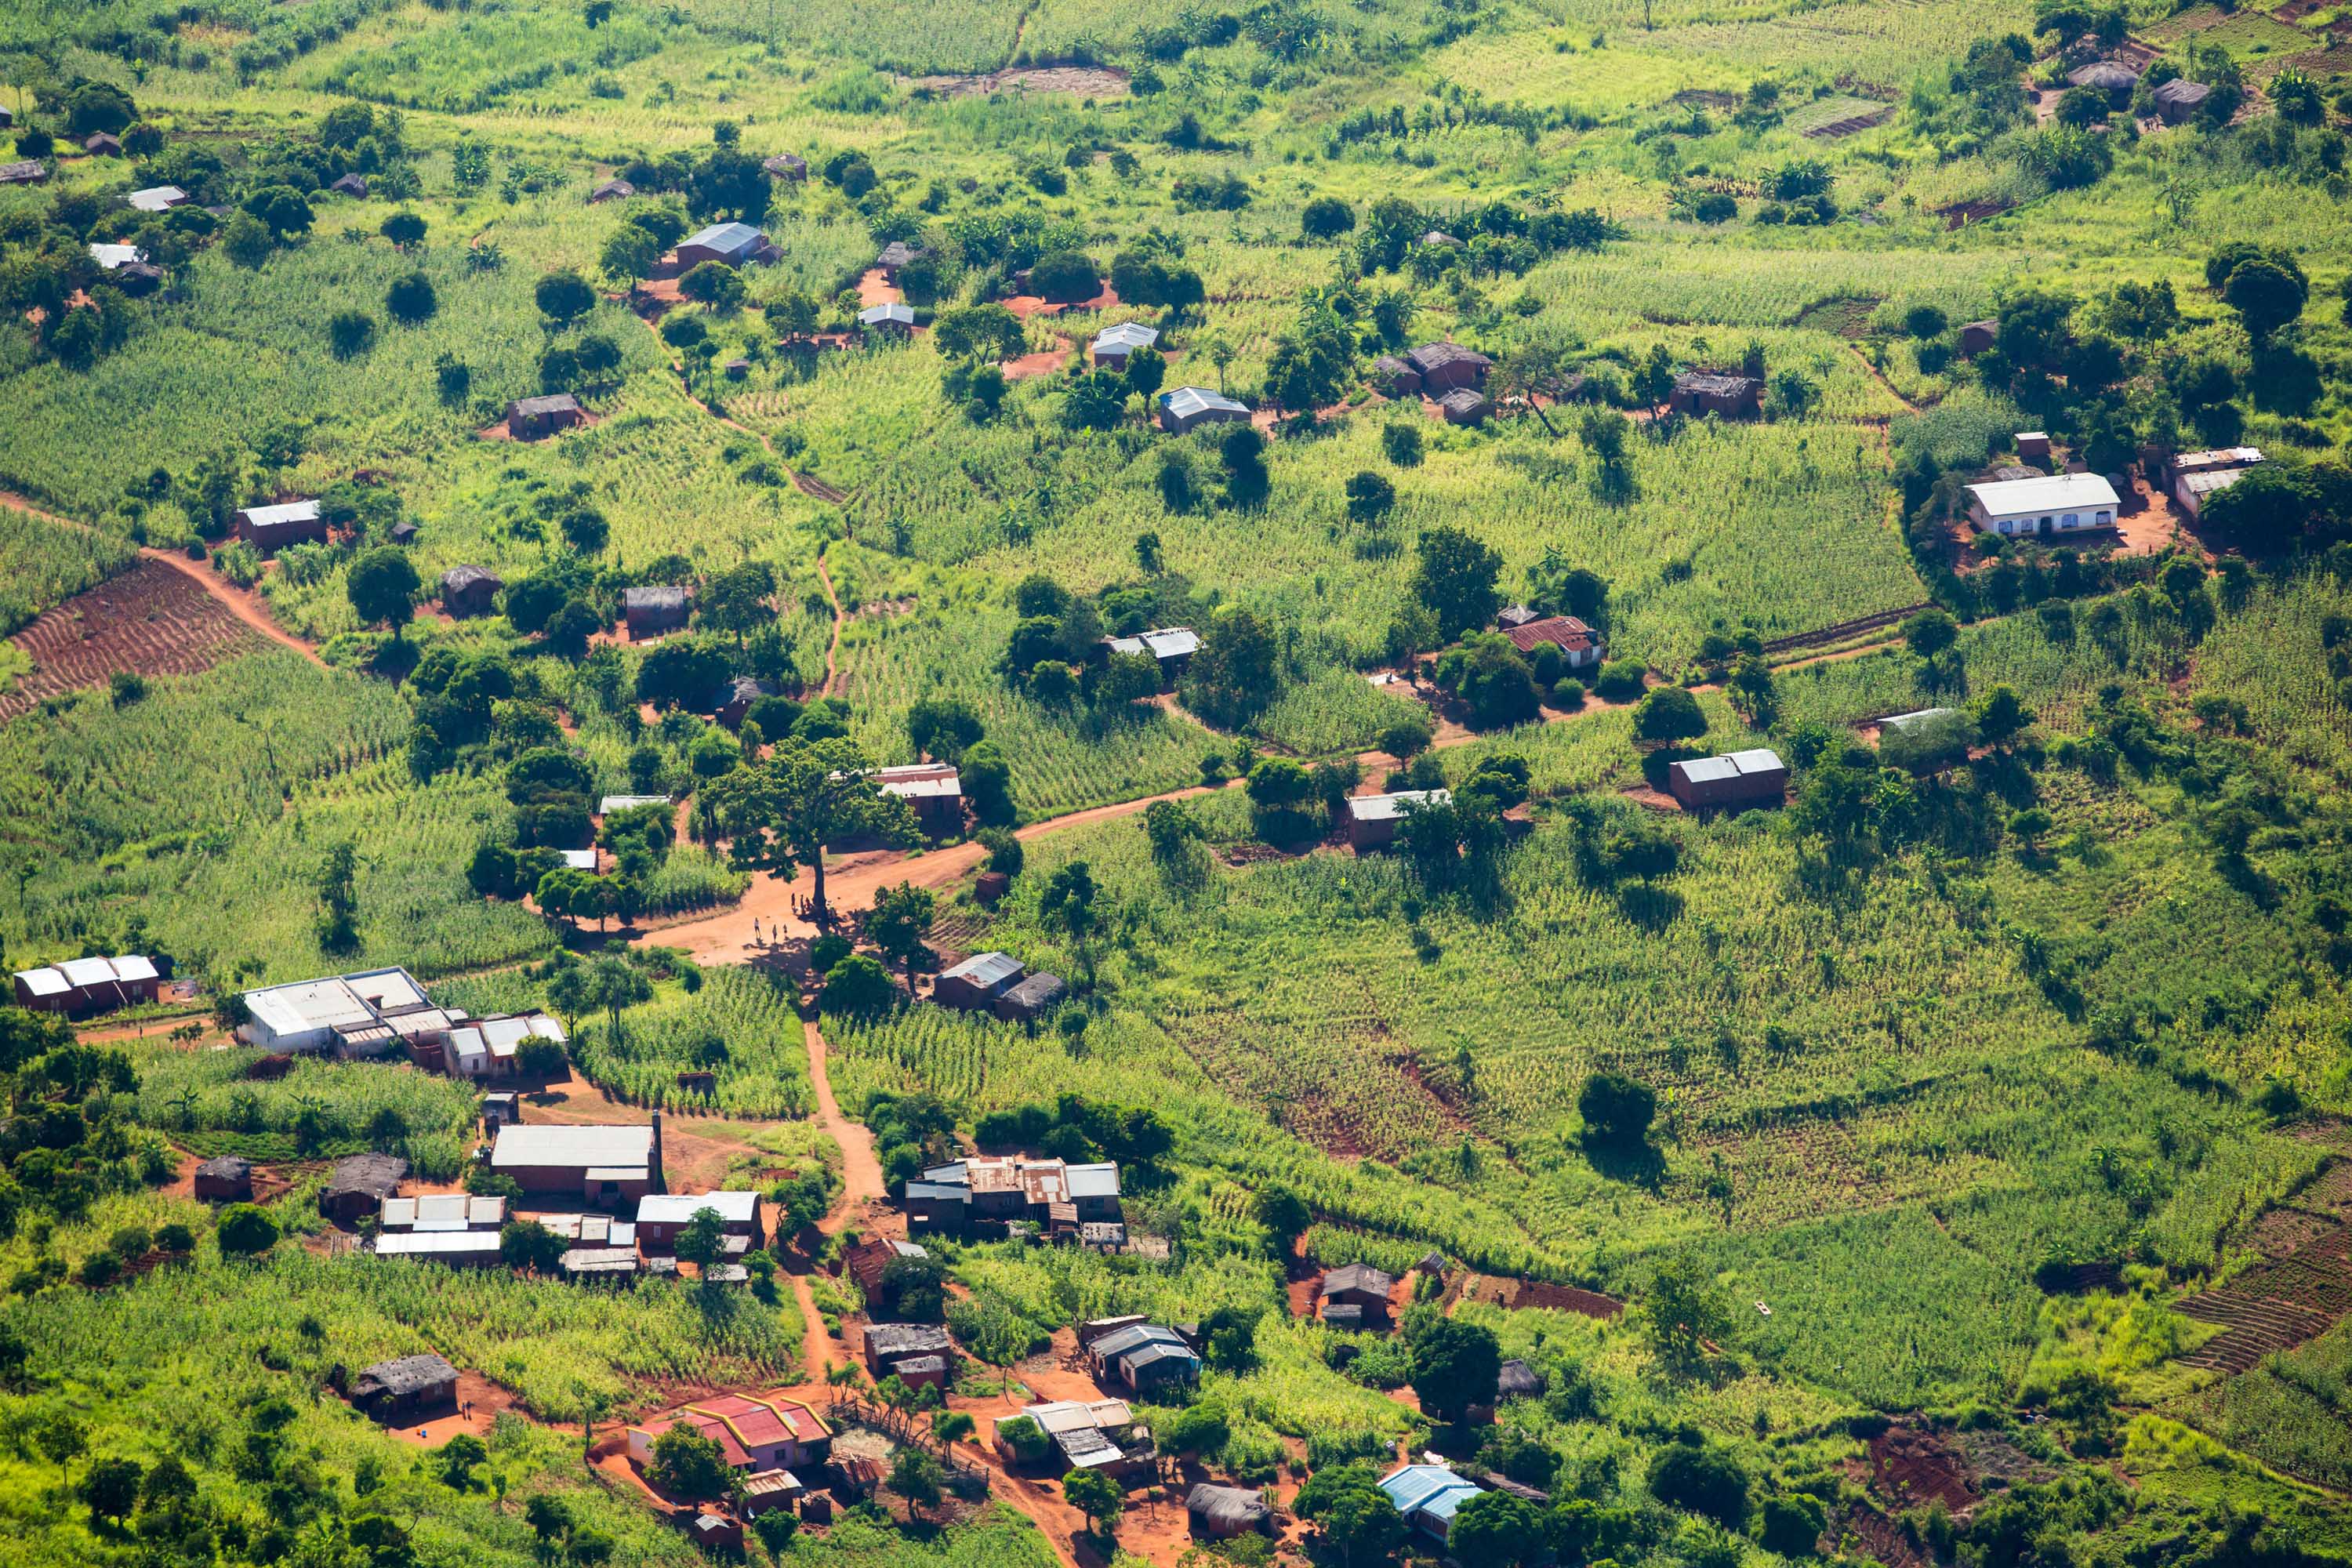 Landscape of buildings and trees in Malawi